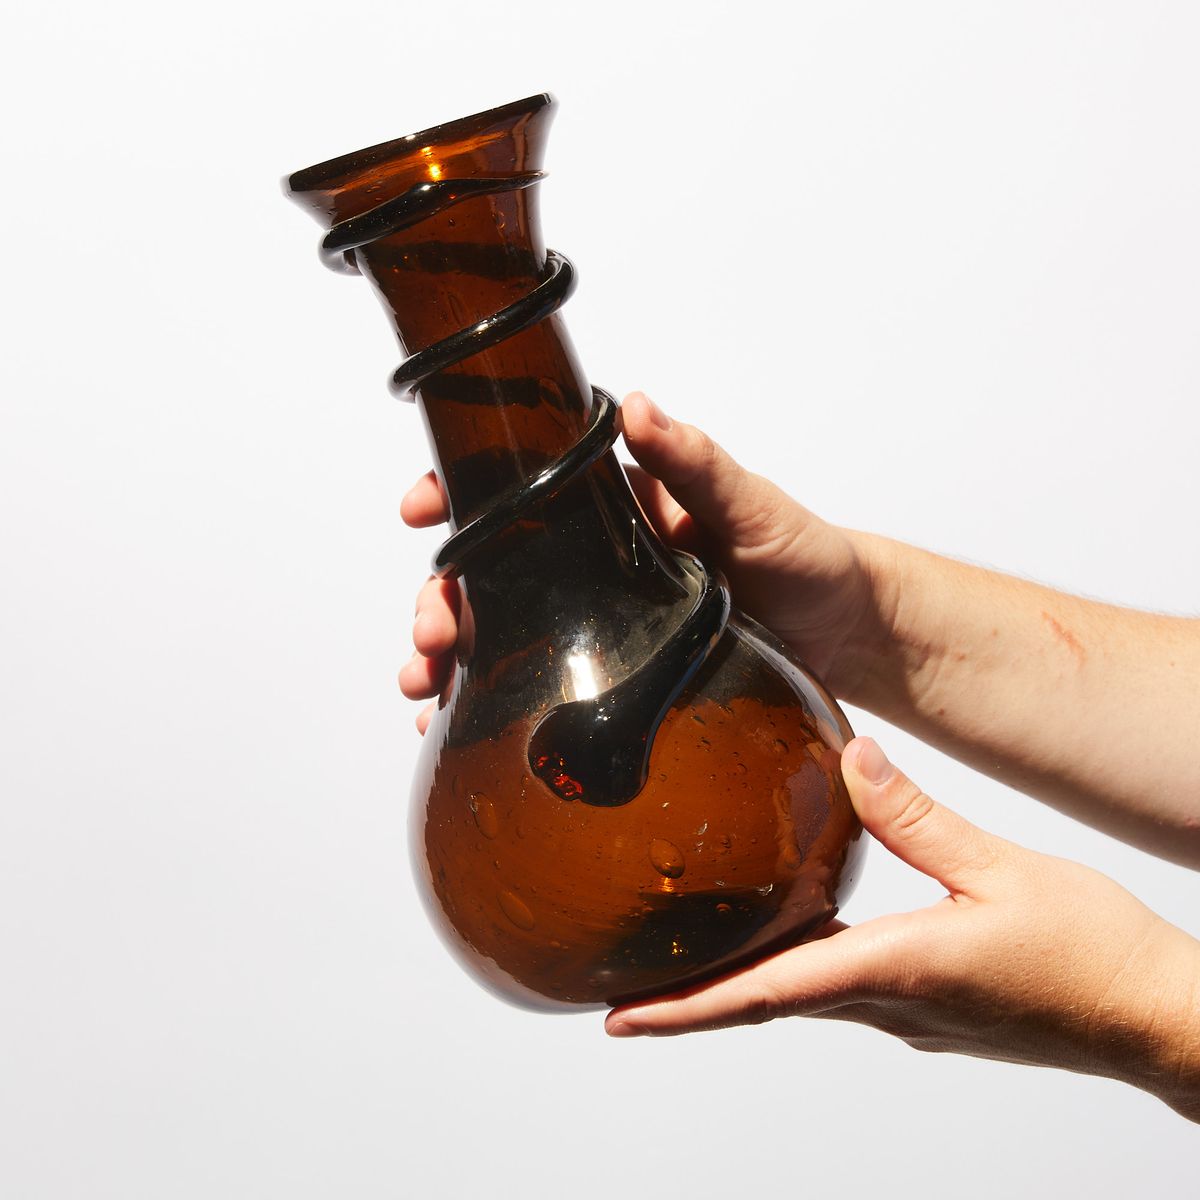 Hand holding Translucent Brown glass vase with black swirl going up the neck